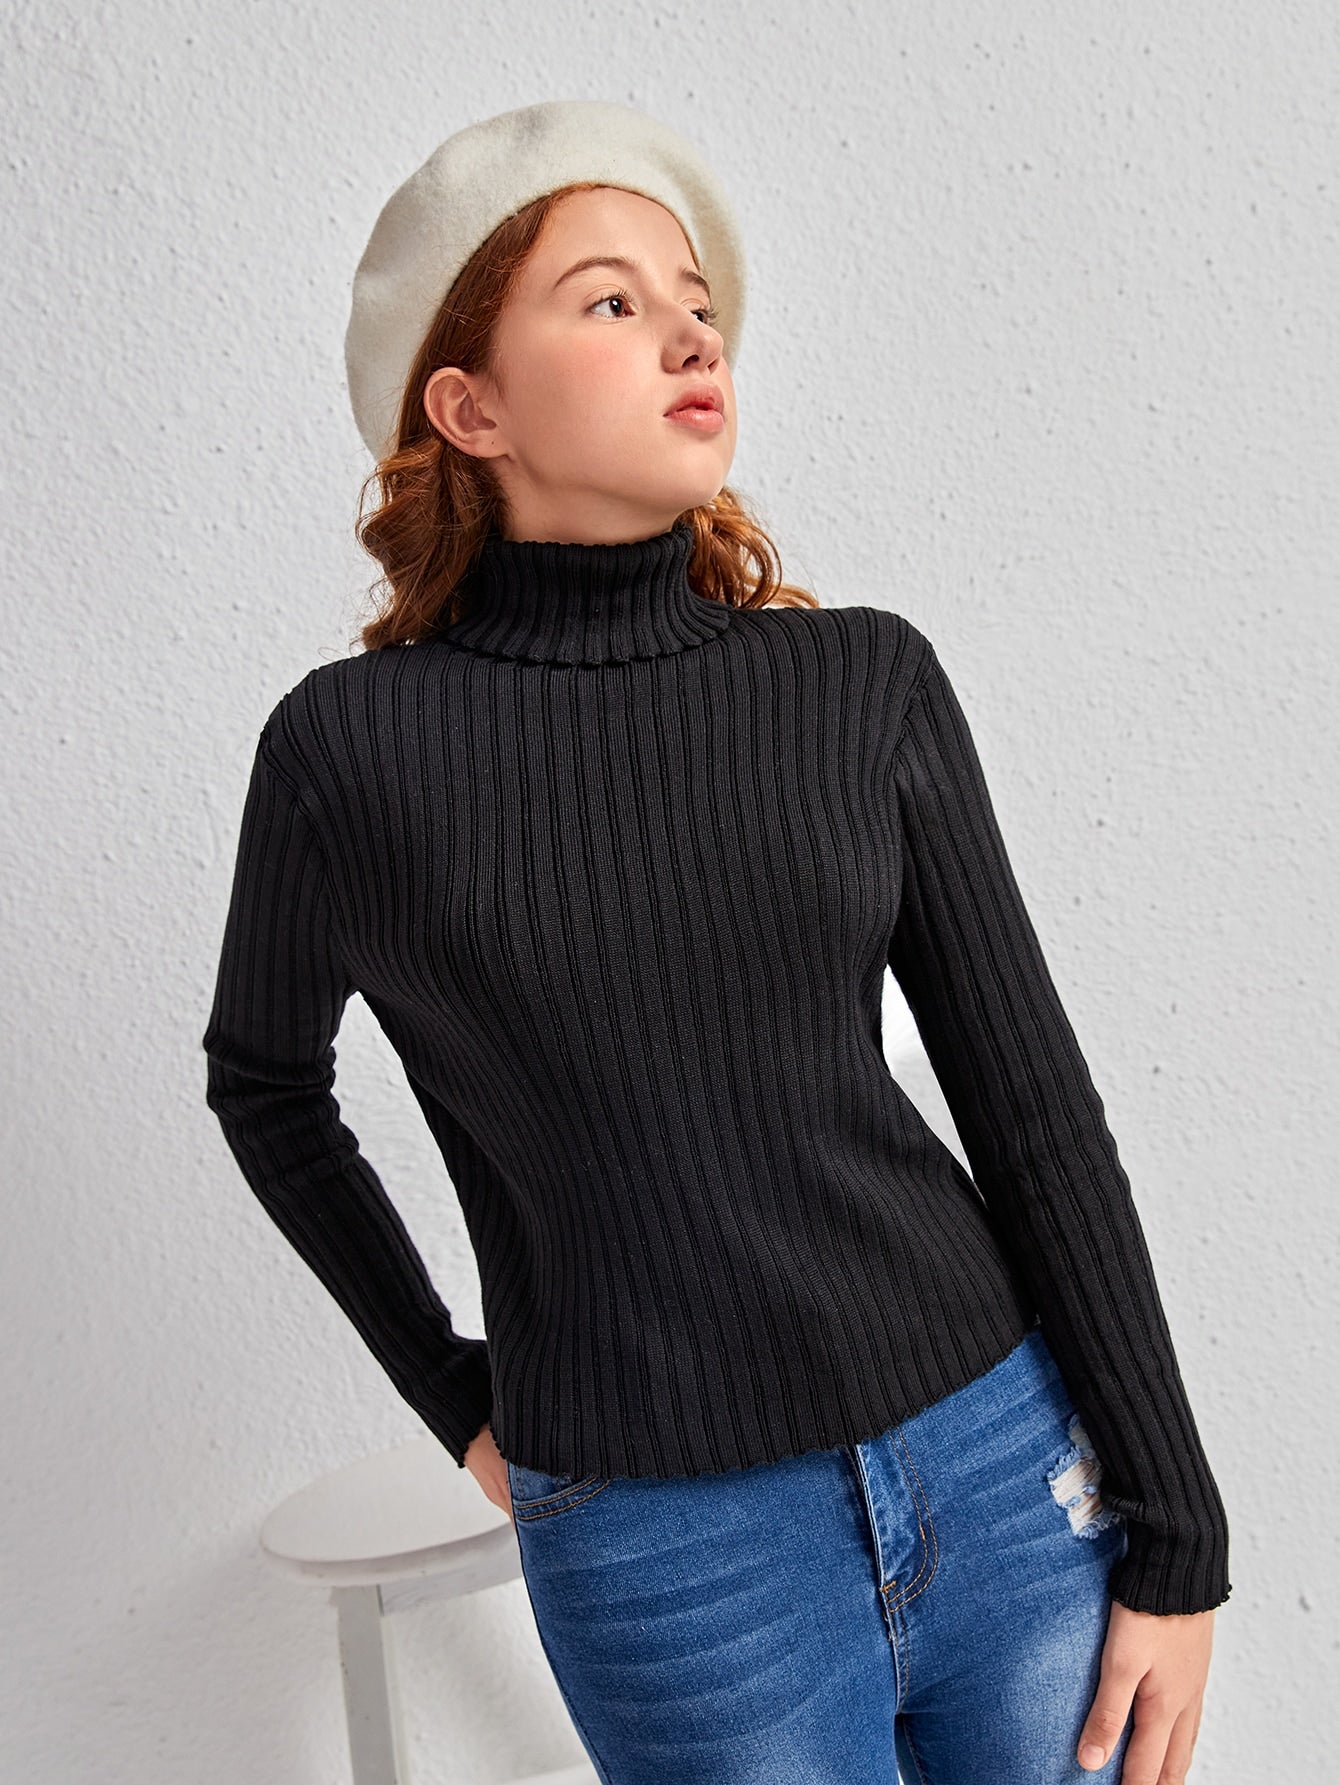 Teen Girls High Neck Ribbed Knit Sweater